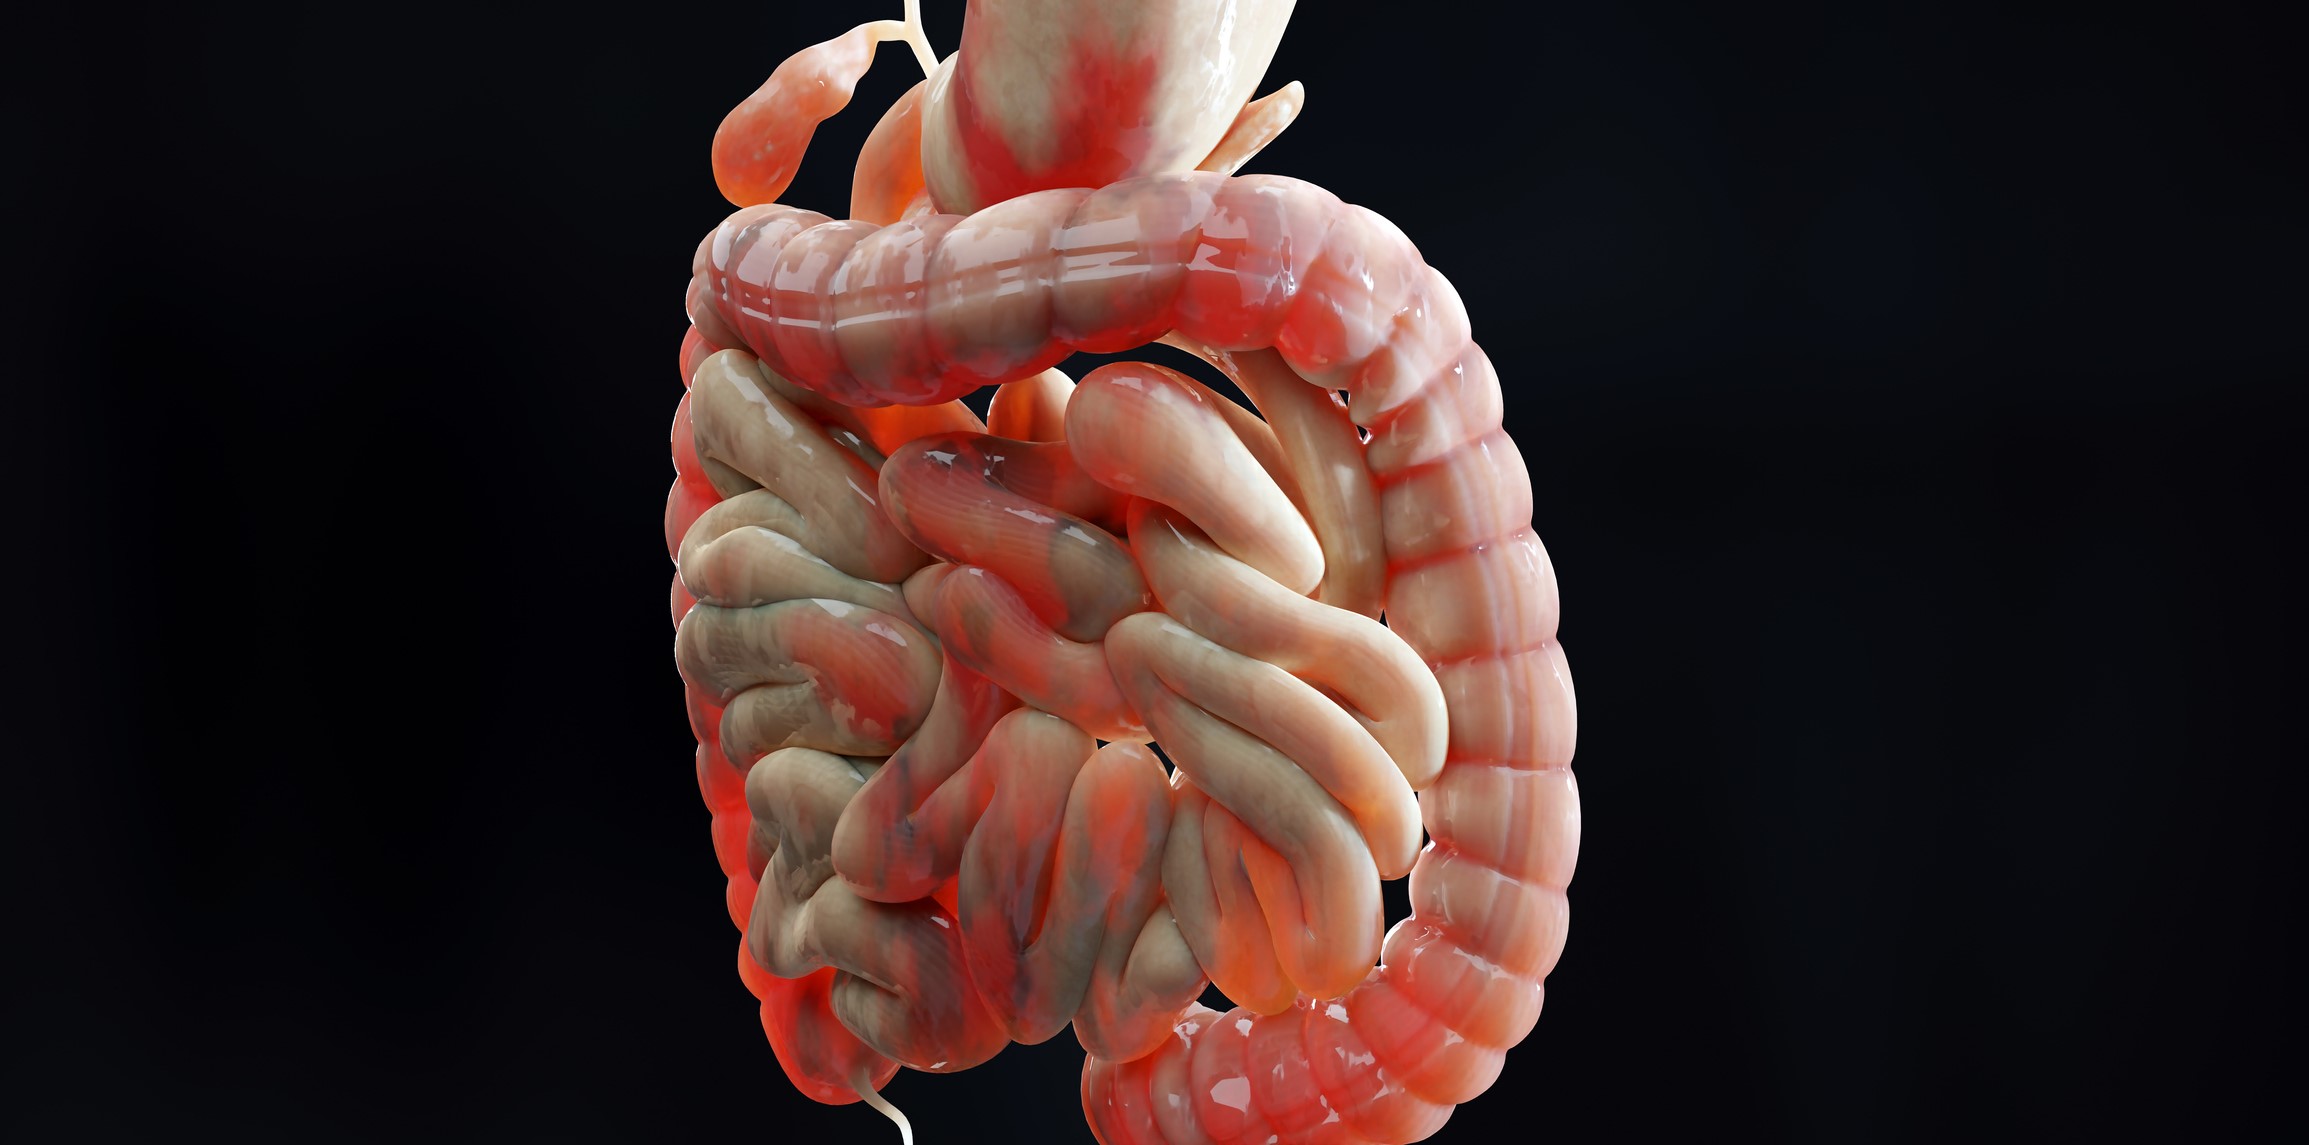 Man suffering from crohns disease, male anatomy, inflamed large intestine, Sigmoid Colon, human digestive system parts, 3d render graphic image, gastroenterology